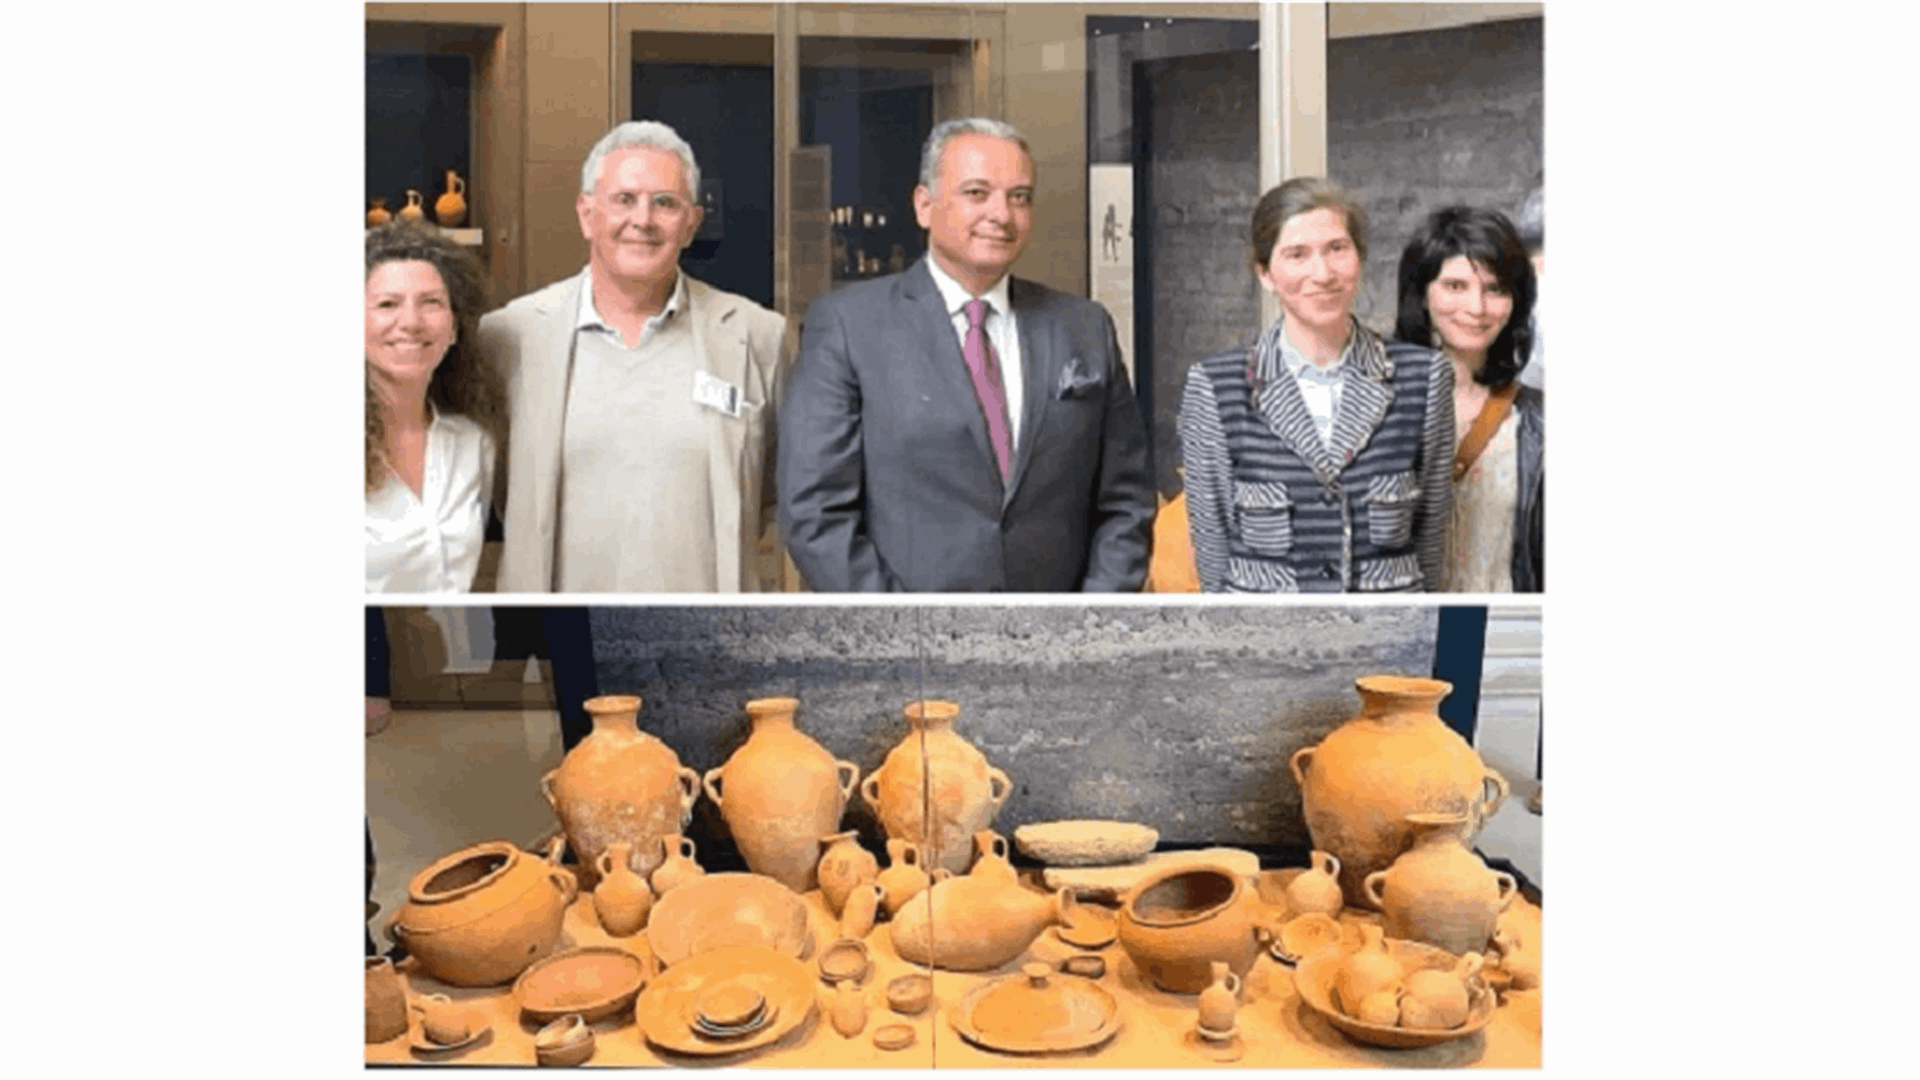 Caretaker Culture Minister al-Mortada inaugurates newly discovered artifacts at Louvre Museum